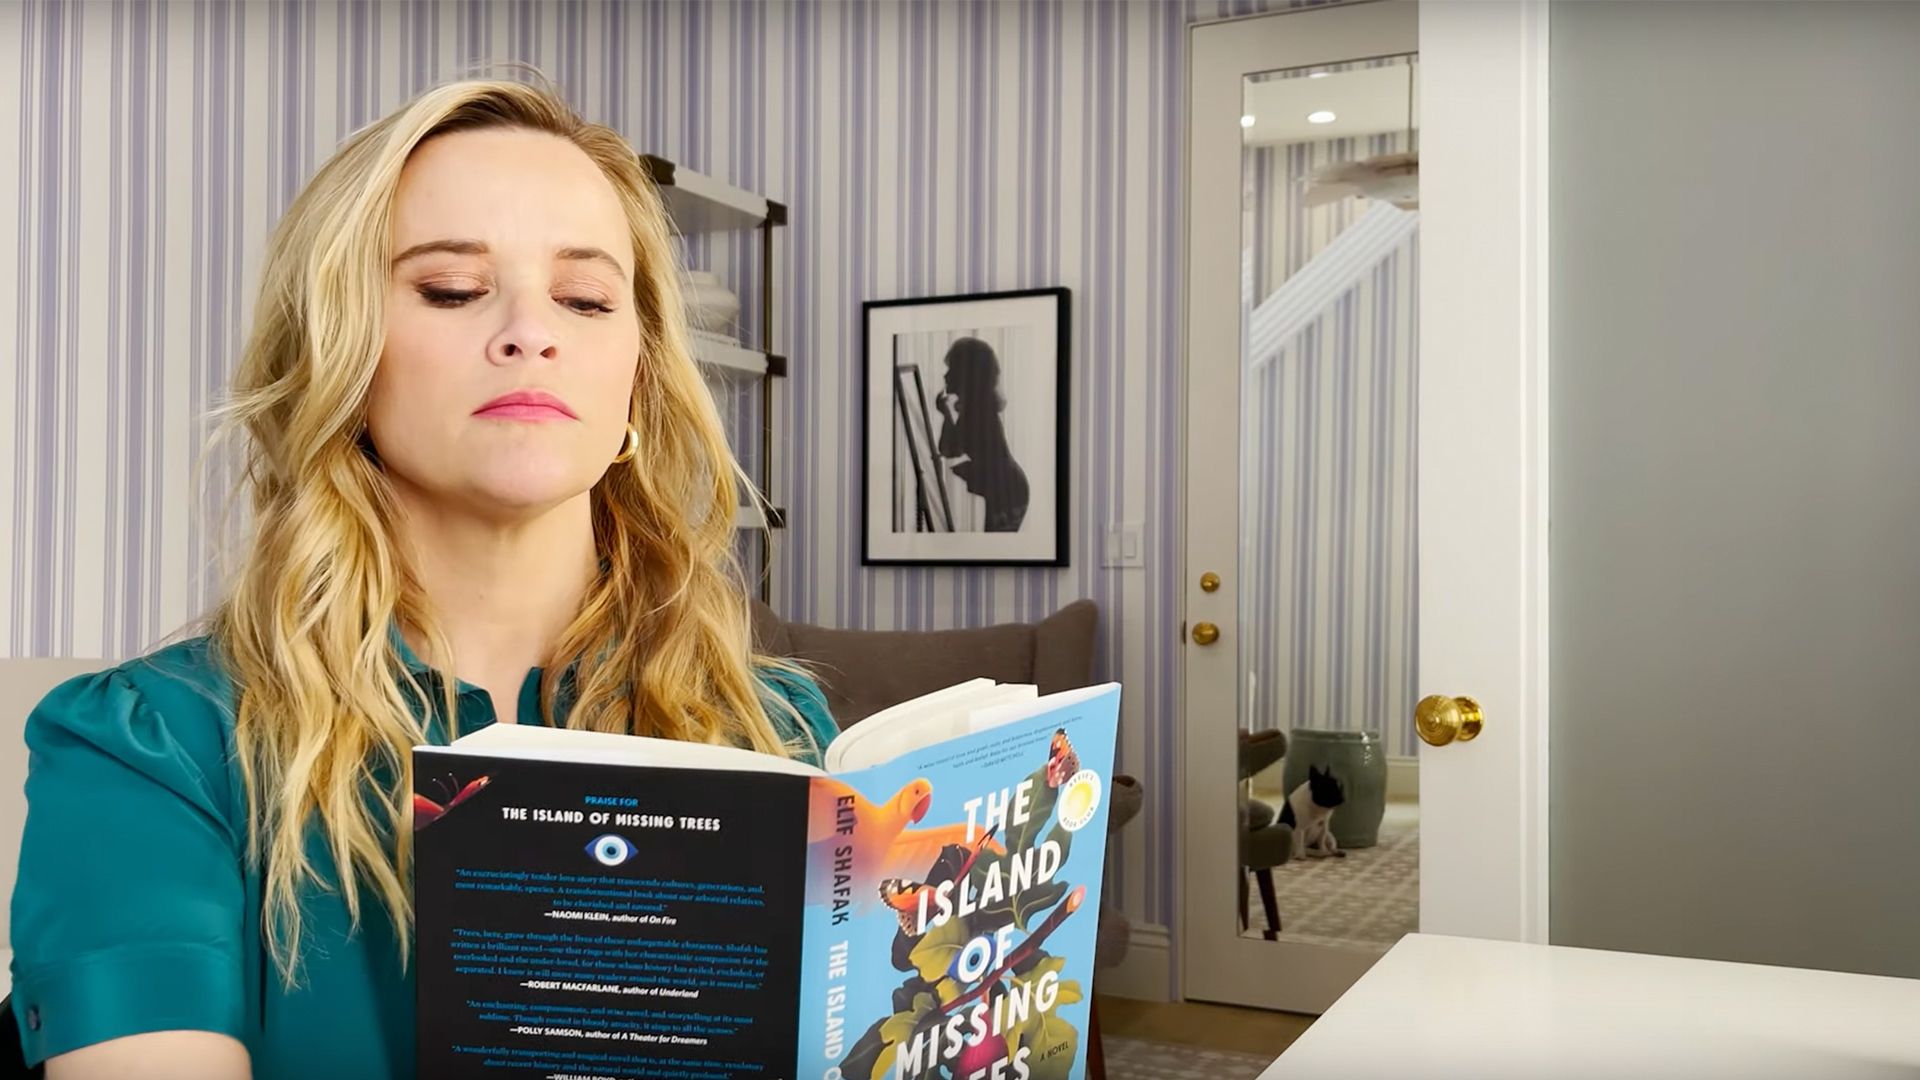 Photo of Reese Witherspoon sitting at a desk reading a book.